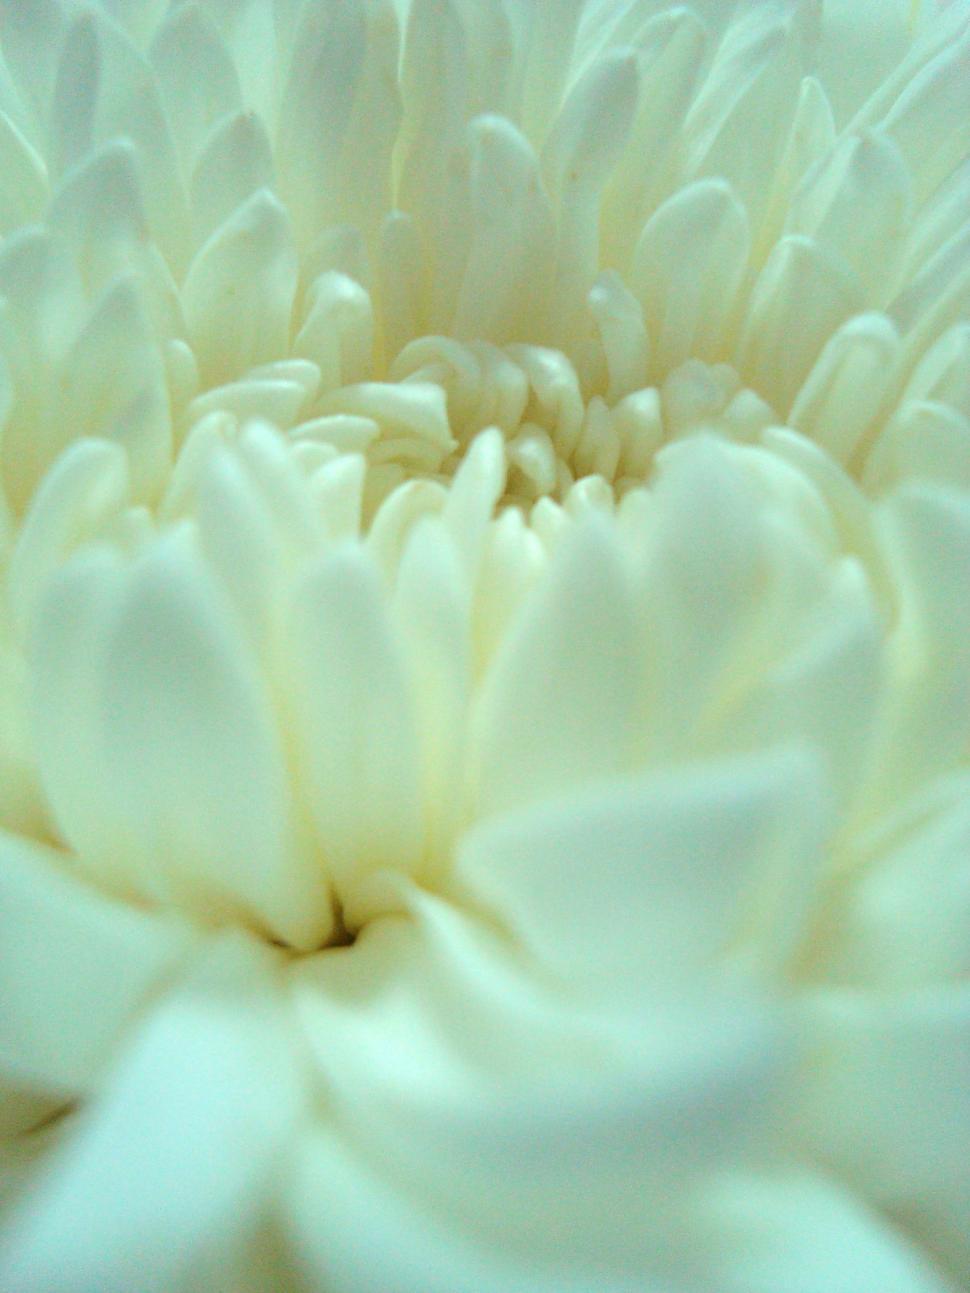 Free Image of White Flower Close-Up 